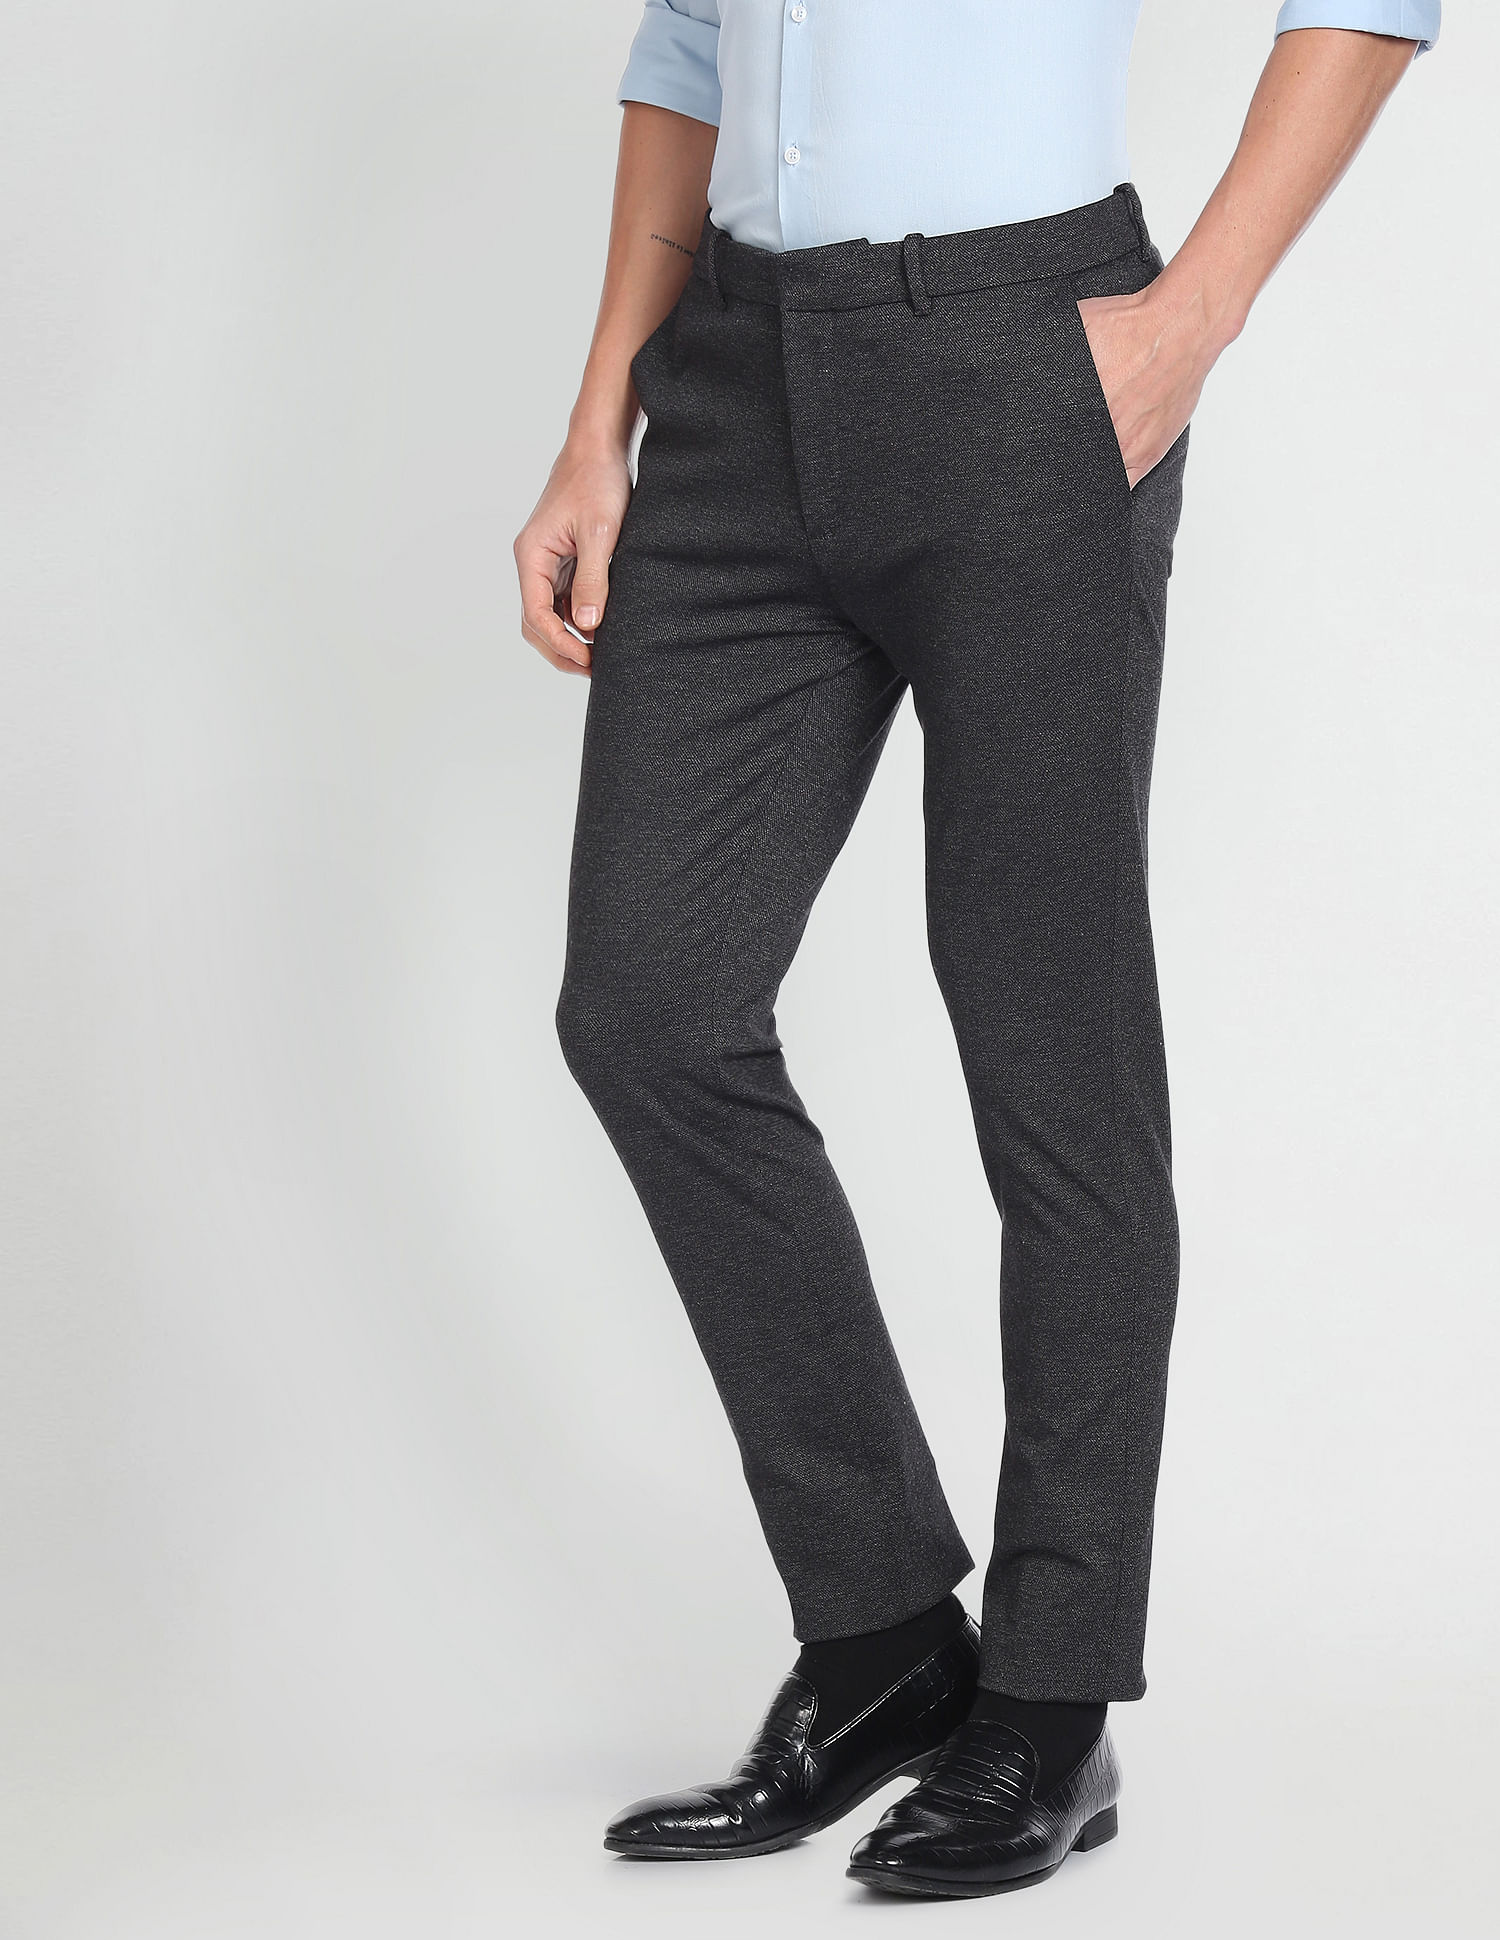 Raymond Park Avenue Dark Grey Super Slim Fit Trouser PMTQ05146G681F082  34 in Chennai at best price by Europa  Justdial